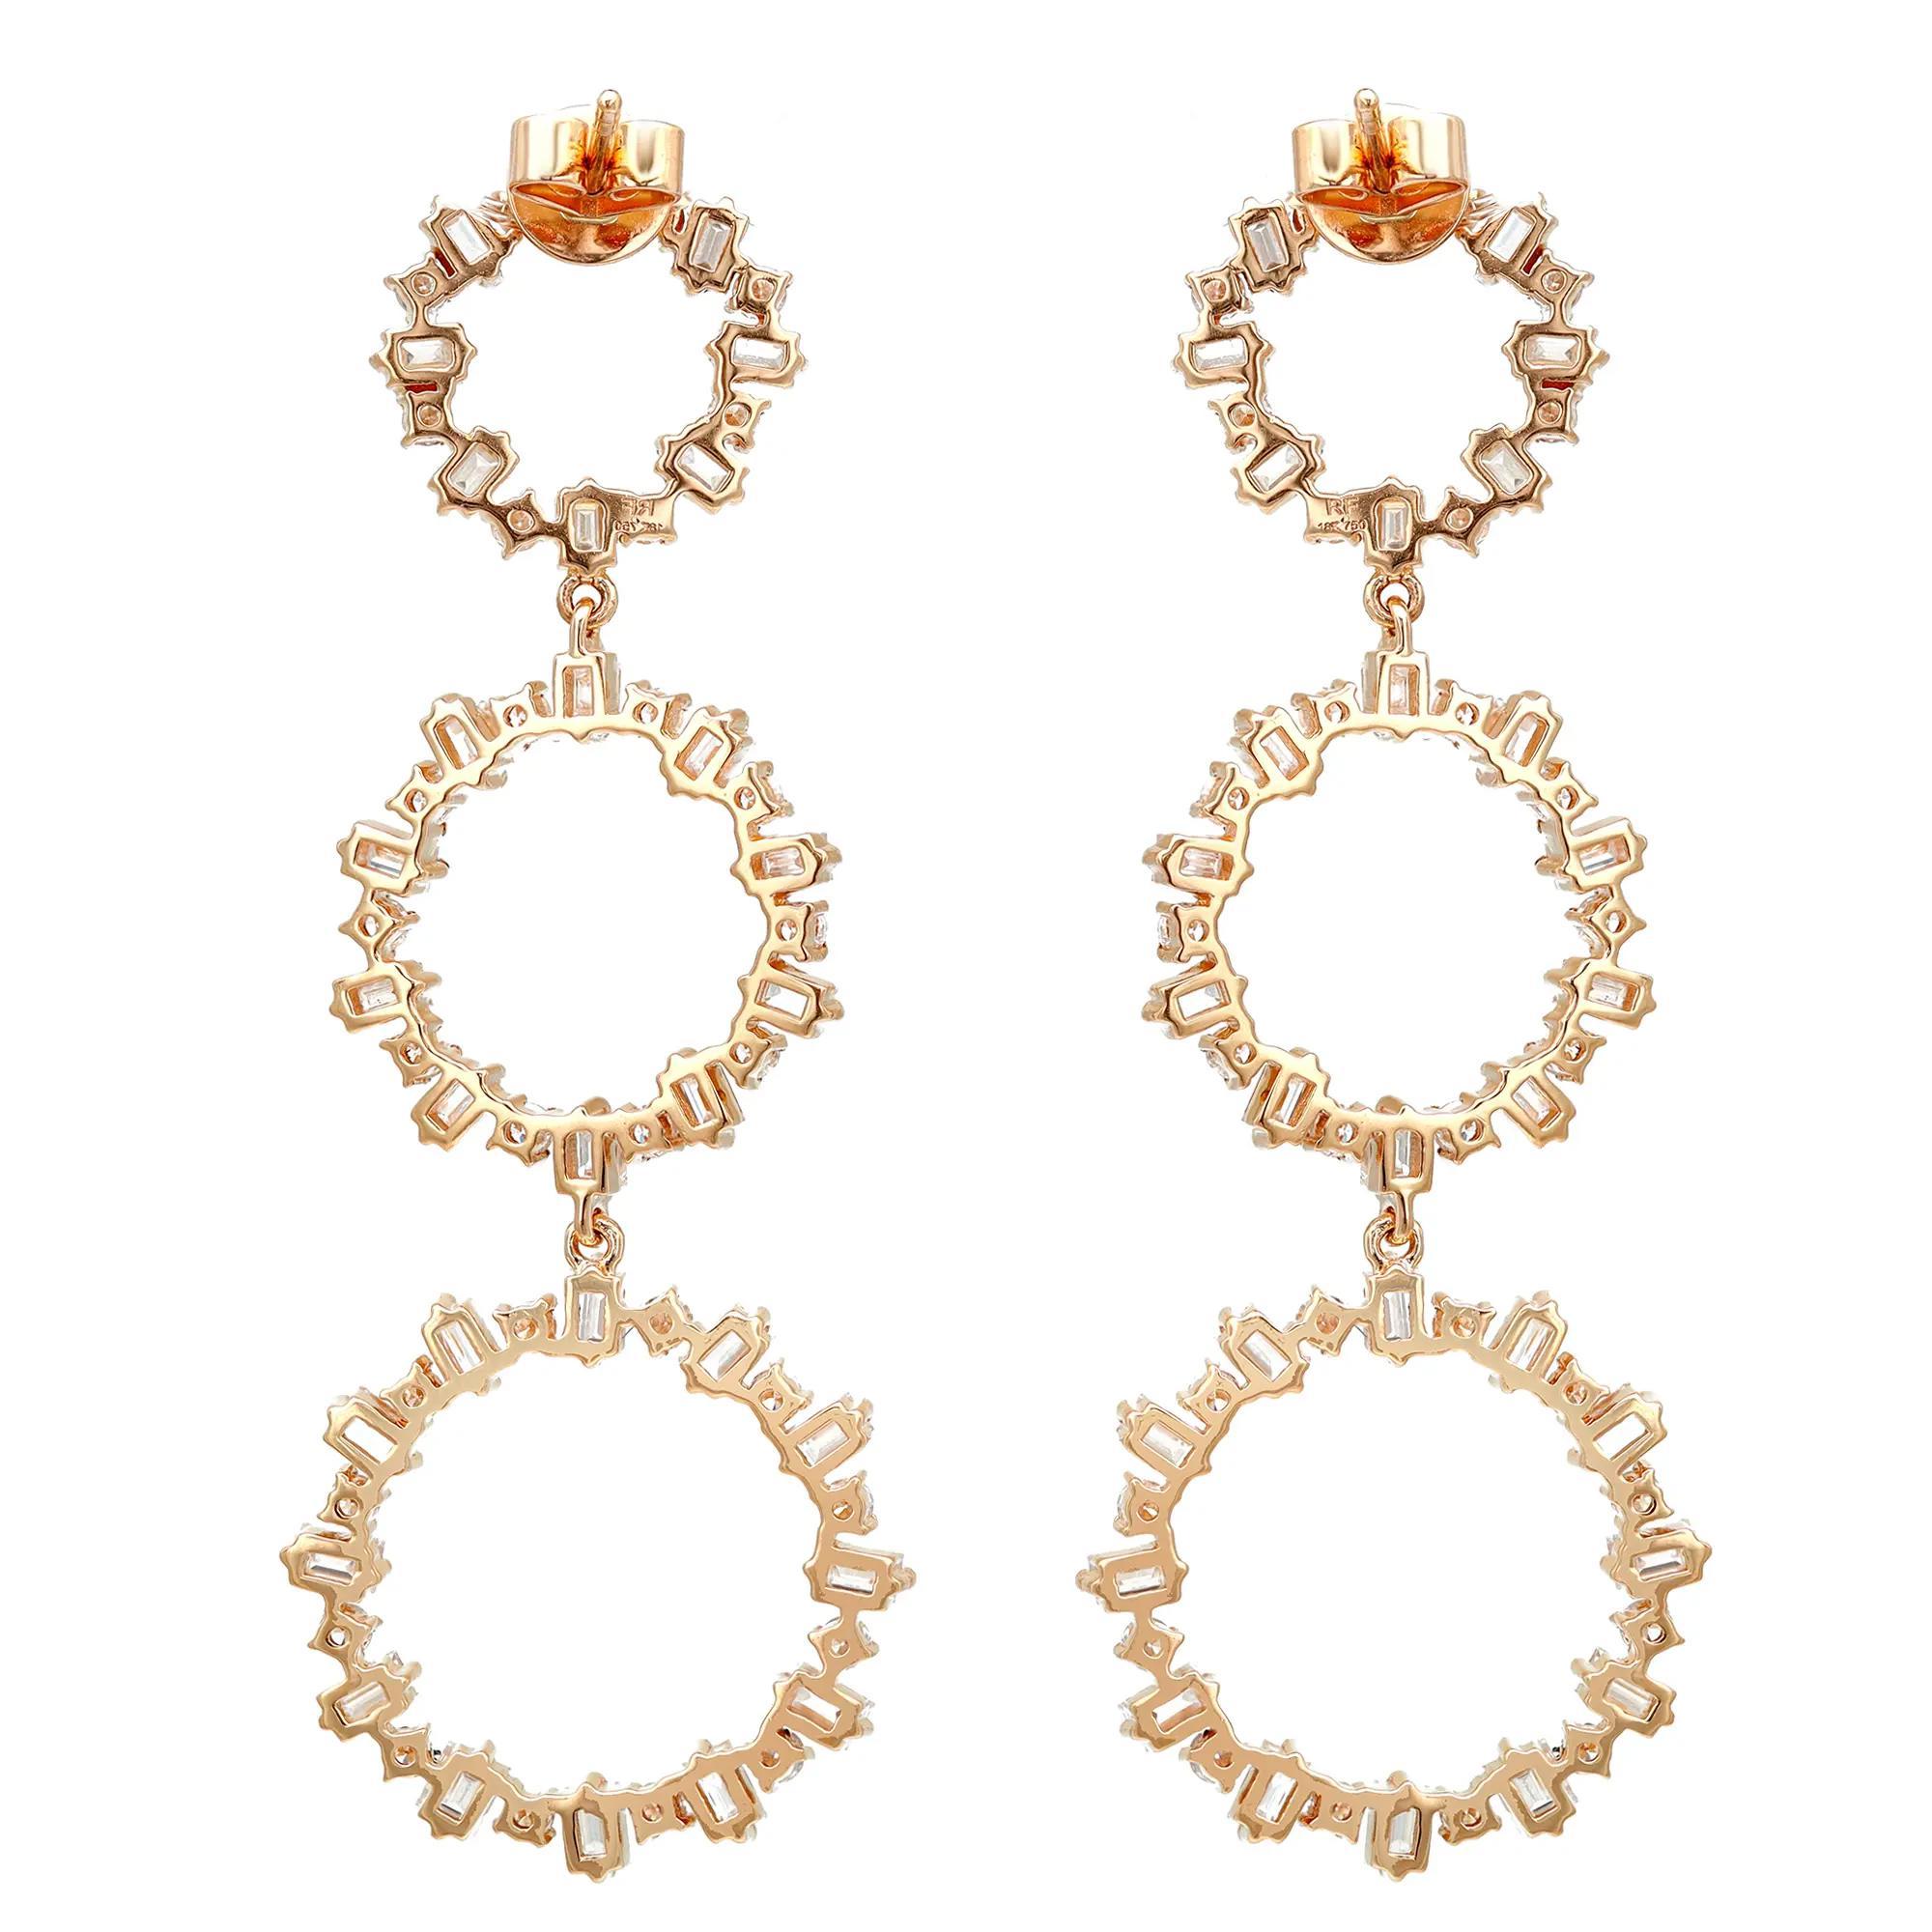 These exemplary dangle earrings mounted in 18k yellow gold add a touch of elegance and sophistication to any outfit. Featuring, prong set baguette and round cut diamonds encrusted in three graduating circles. Total diamond weight: 4.58 carats.